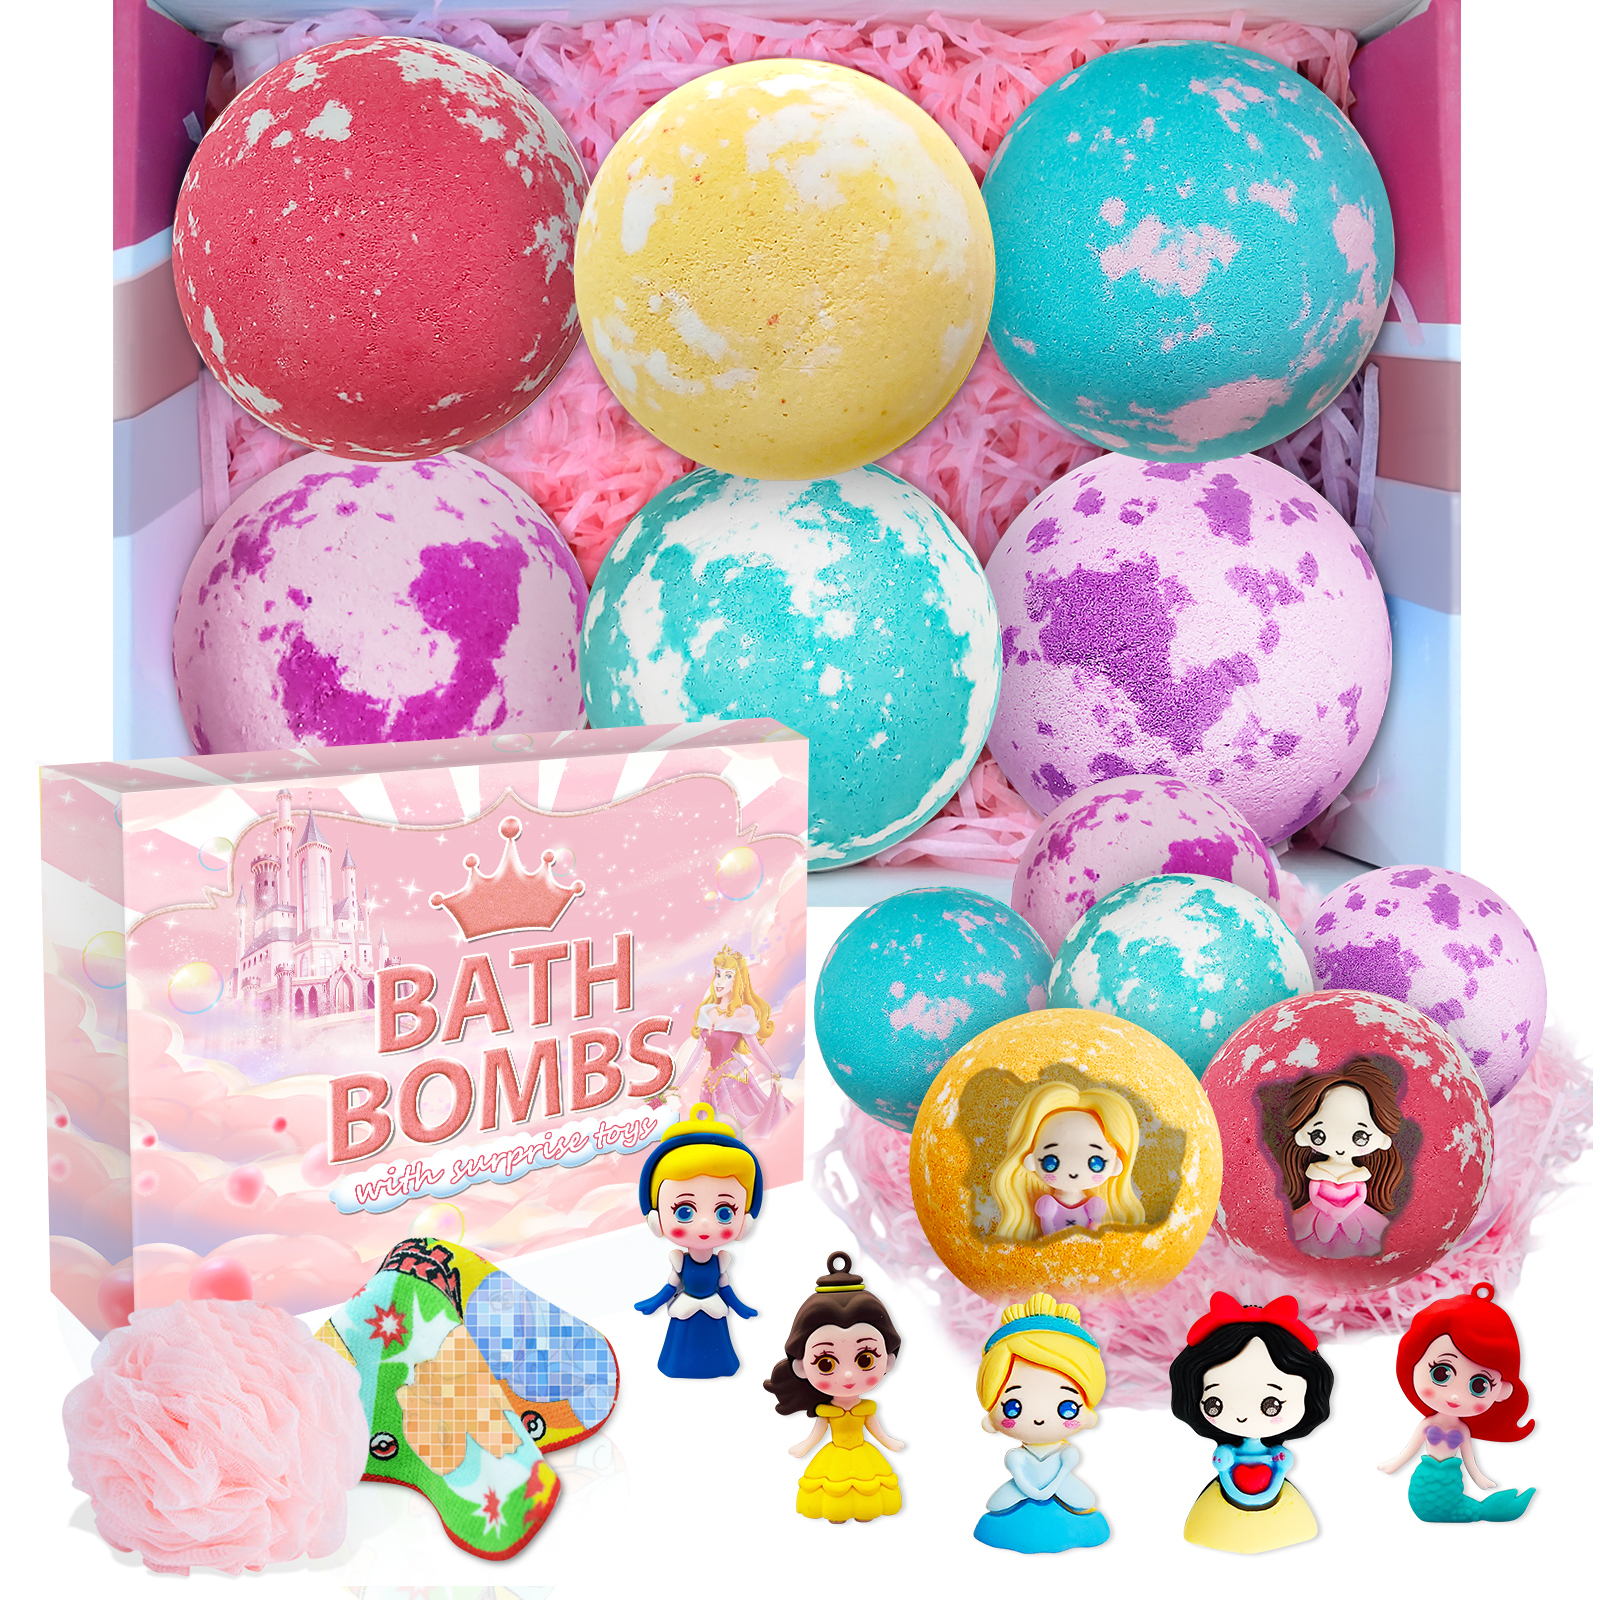 Bath Bombs for Kids with Surprise Inside: Supbec XXL Princess Organic Bath Bombs Gift Set Rich in Natural Essential Oils, Kids Bath Bombs Fizzy for Dry Skin Moisturize, Christmas Gift (6 Pcs, 5 OZ)